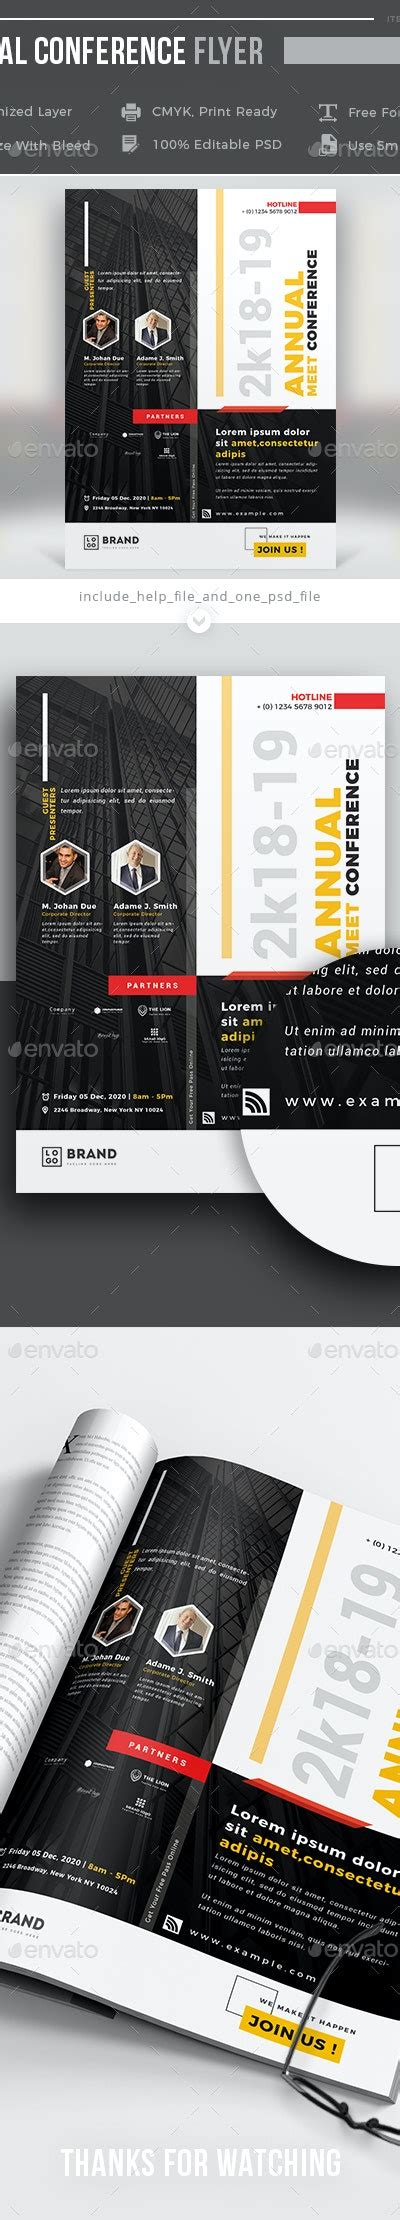 Annual Conference Flyer Print Templates Graphicriver